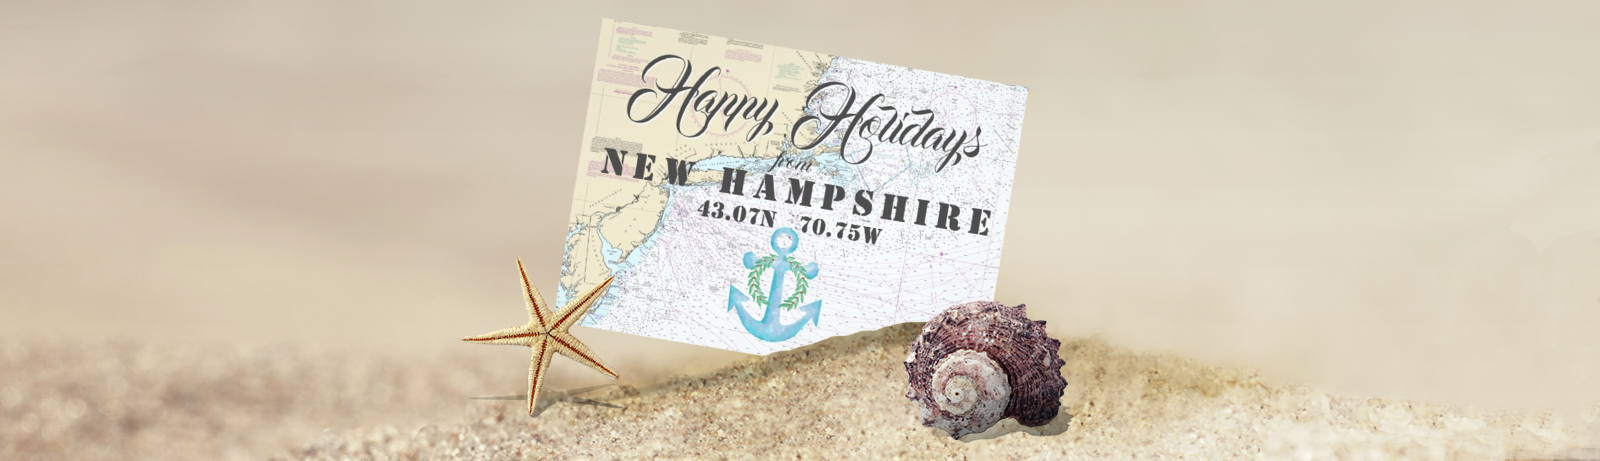 Tropical and Nautical Holiday Cards Banner showing Happy Holidays from New Hampshire Holiday Card